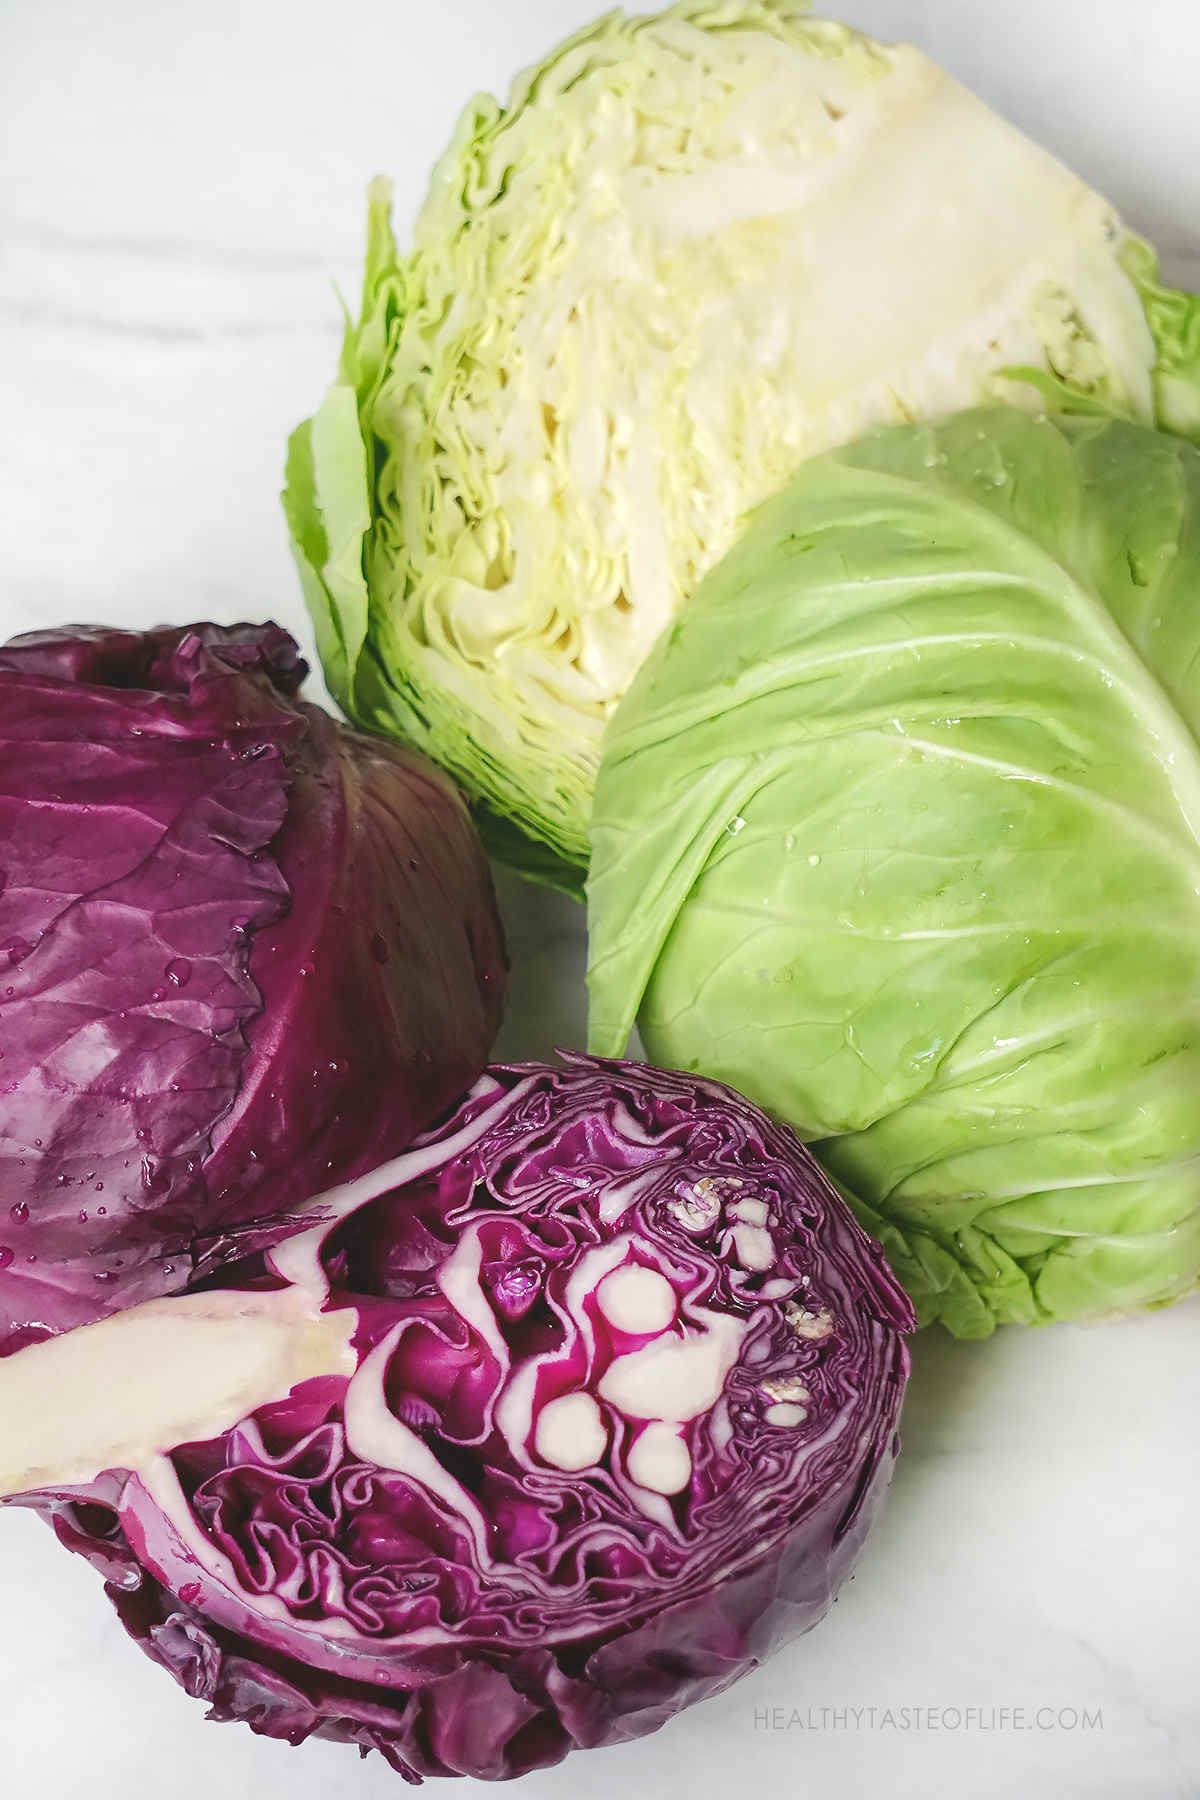 Fresh green and purple cabbage ready to be shredded to make a healthy coleslaw.